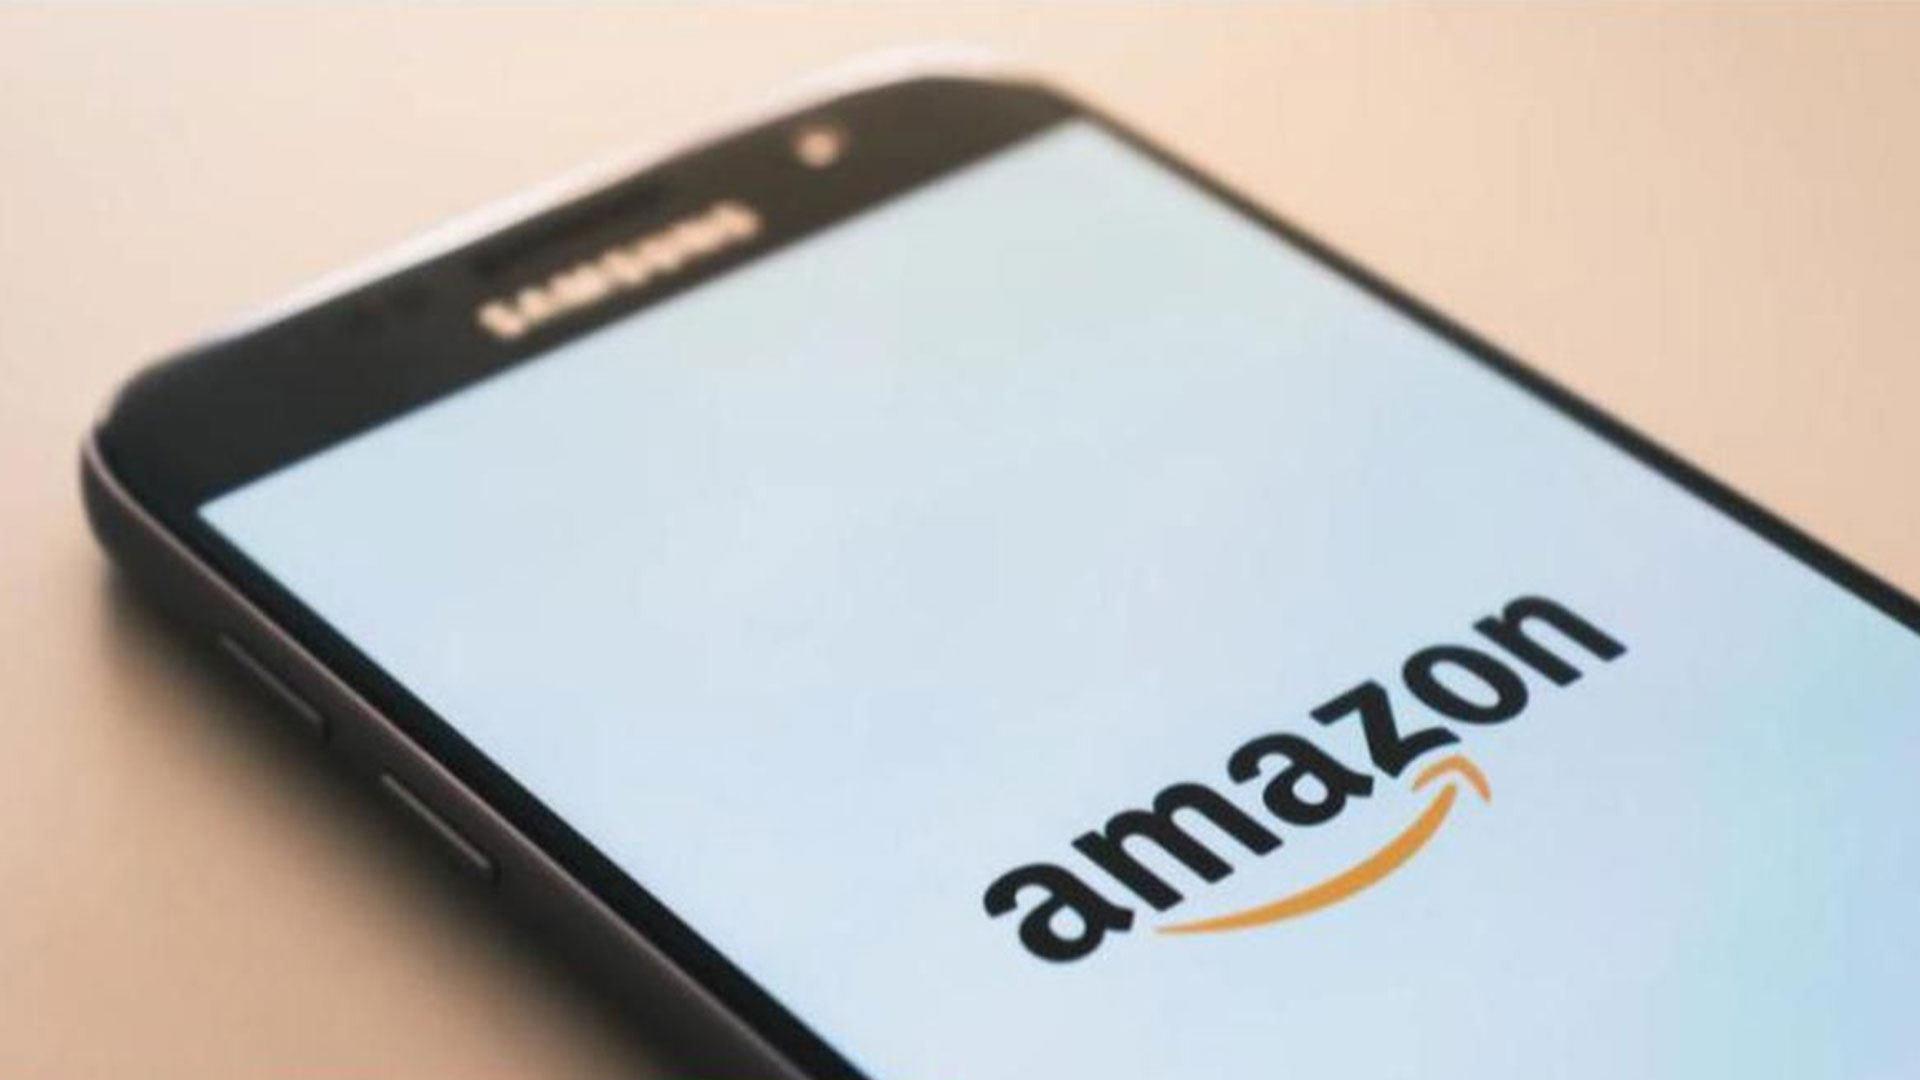 A smart phone with the Amazon logo on the screen.